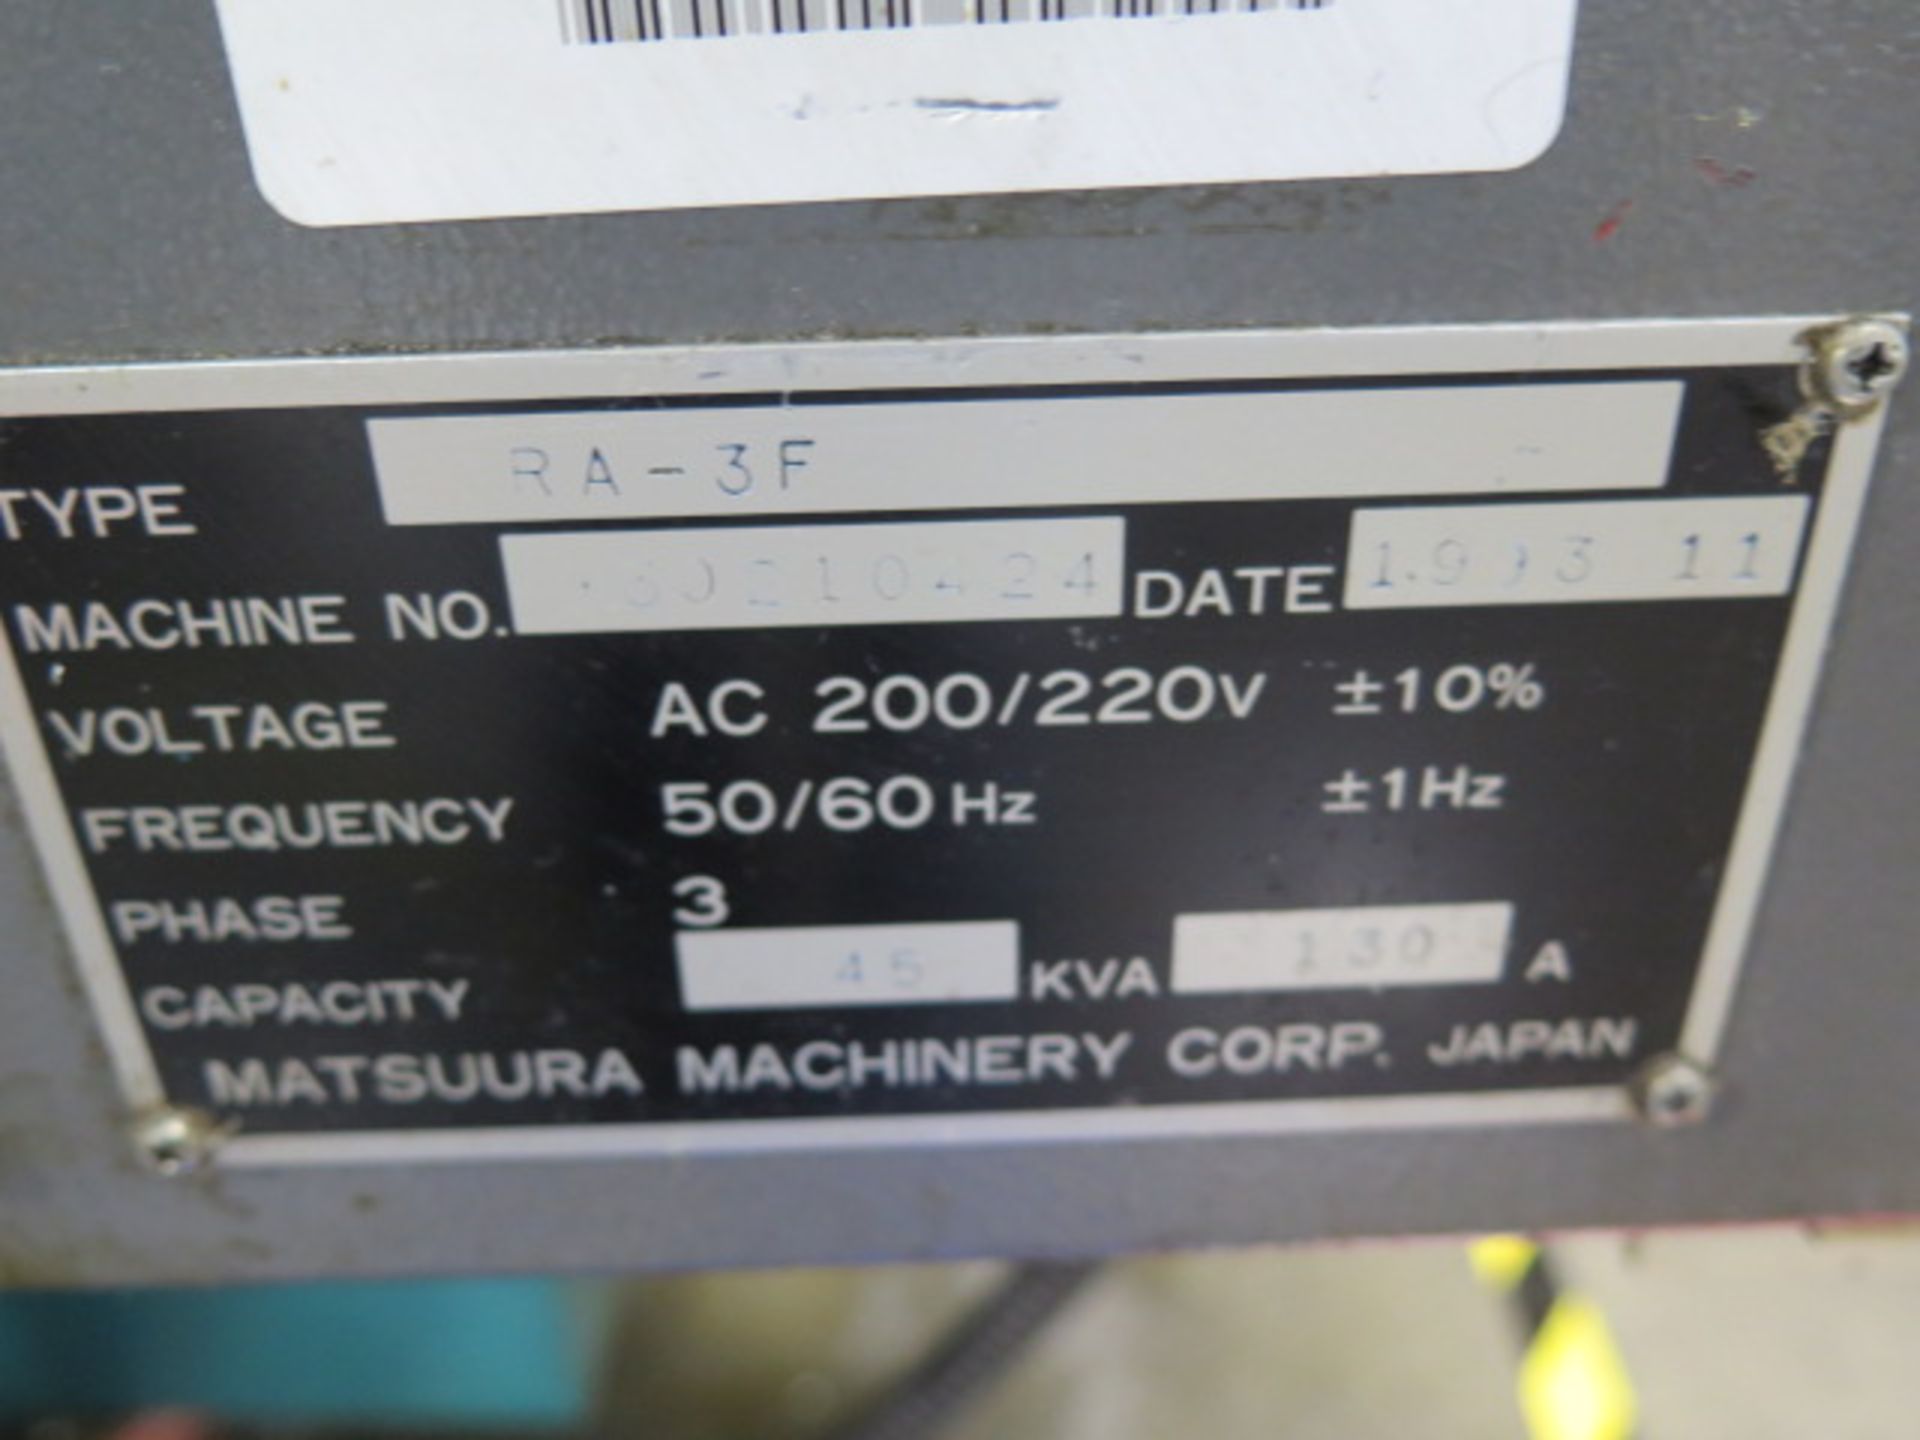 Matsuura RA-3F 2-Pallet CNC Vertical Machining Center s/n 930210424 w/ Yasnac i-80 Controls, Hand Wh - Image 20 of 20